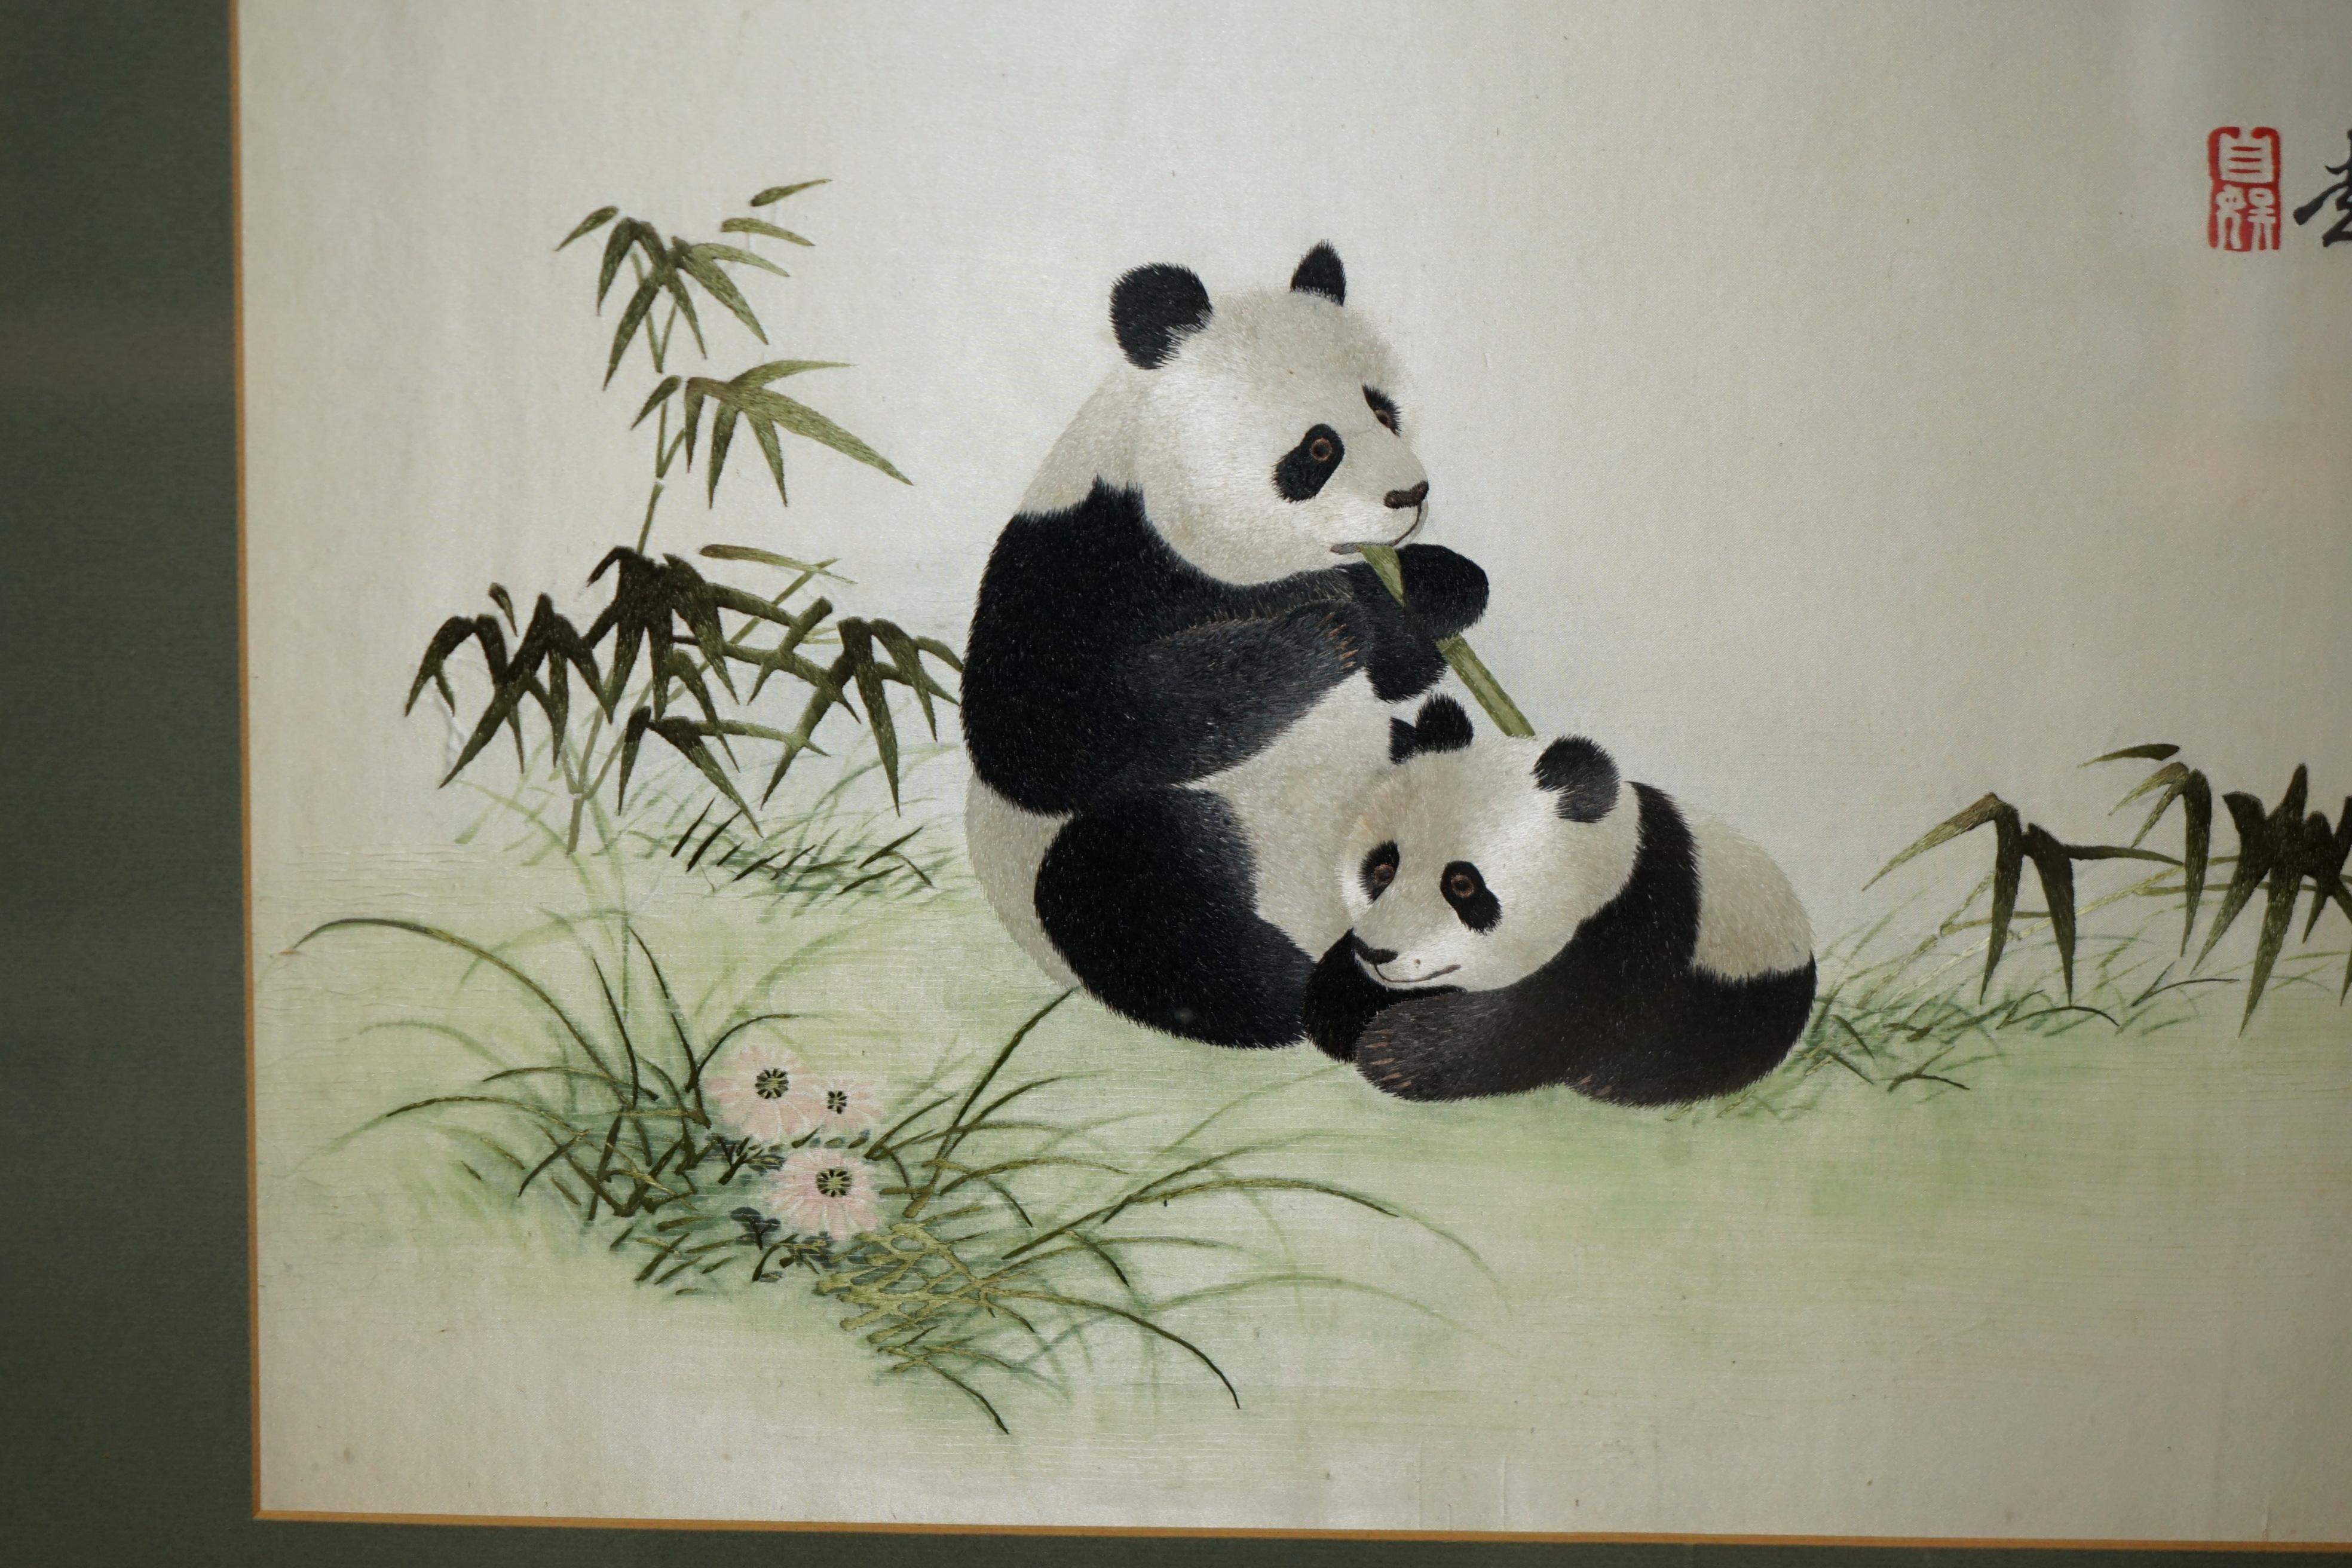 Royal House Antiques

Royal House Antiques is delighted to offer for sale this lovely super decorative vintage Chinese Silk Tapestry Depicting Pandas having fun in the forest

A very good looking and well made vintage piece, there are some later